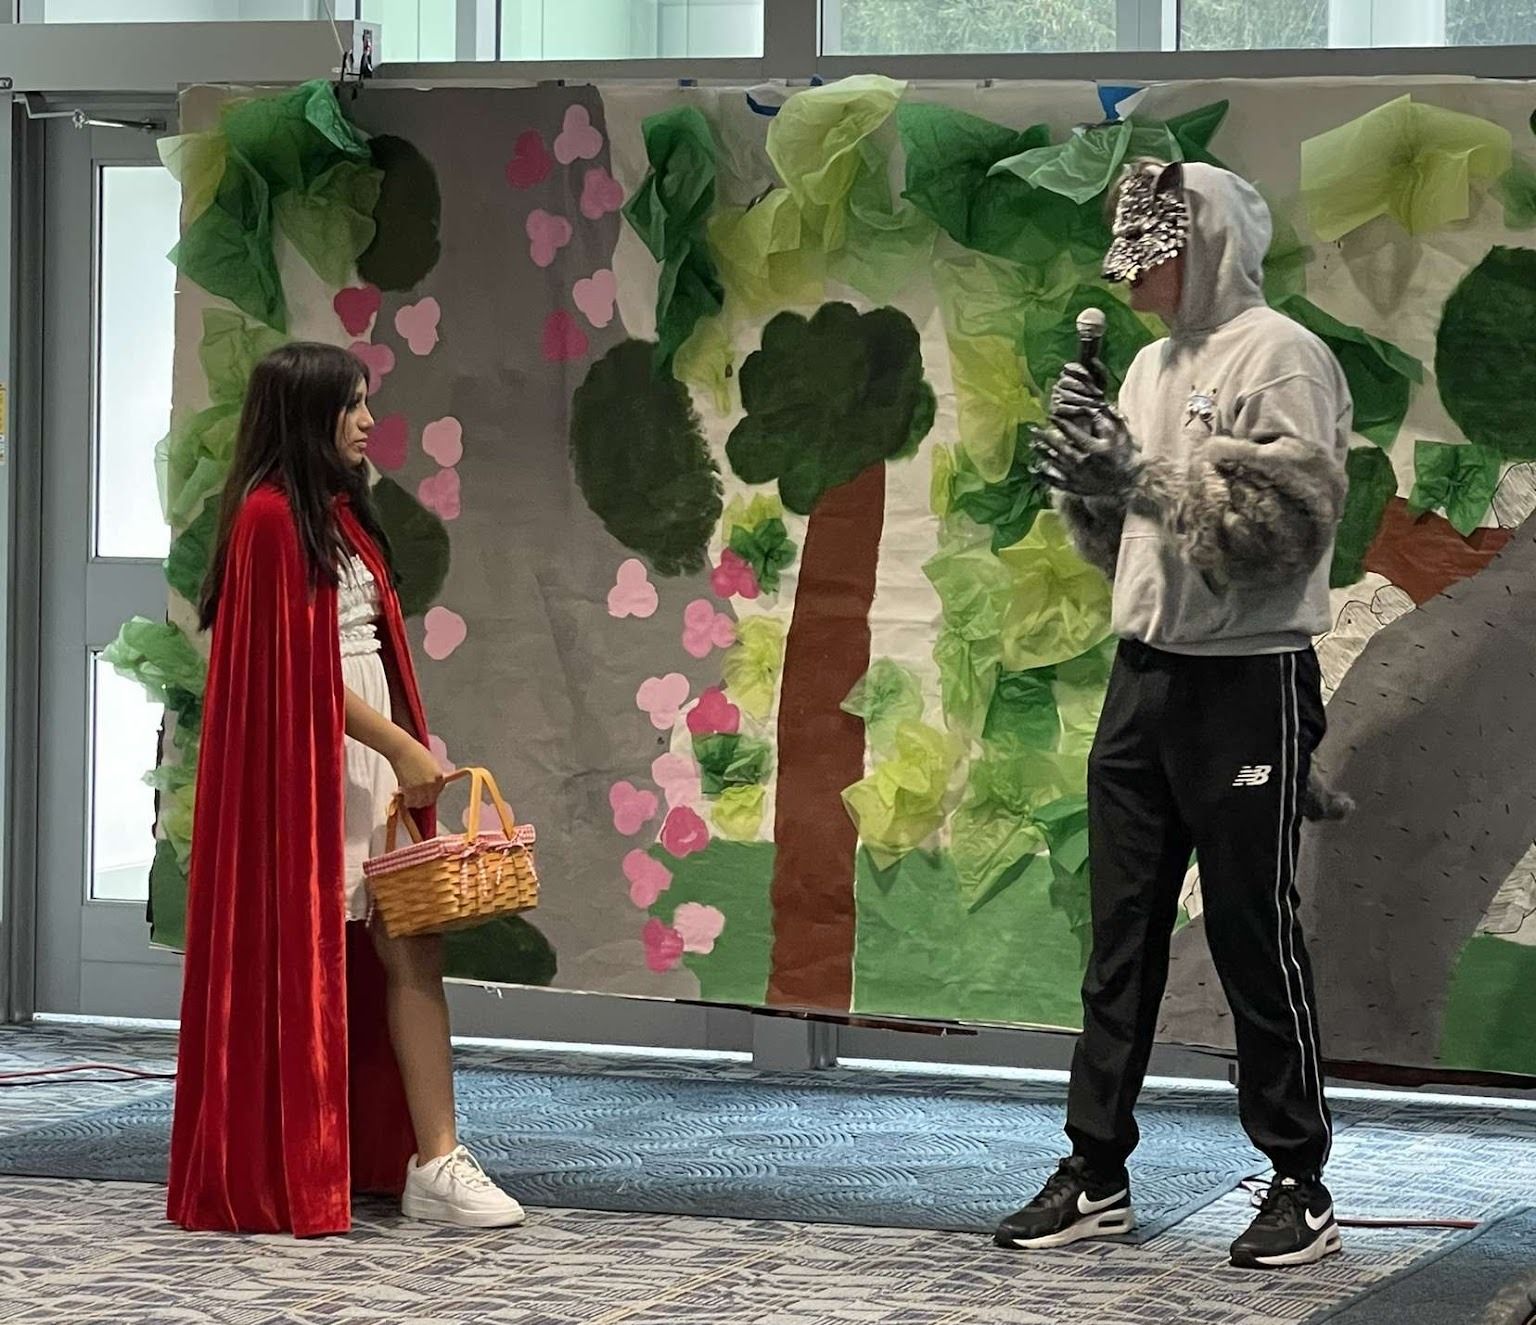 A girl in a red cloak stands looking at a person dressed in a wolf mask.